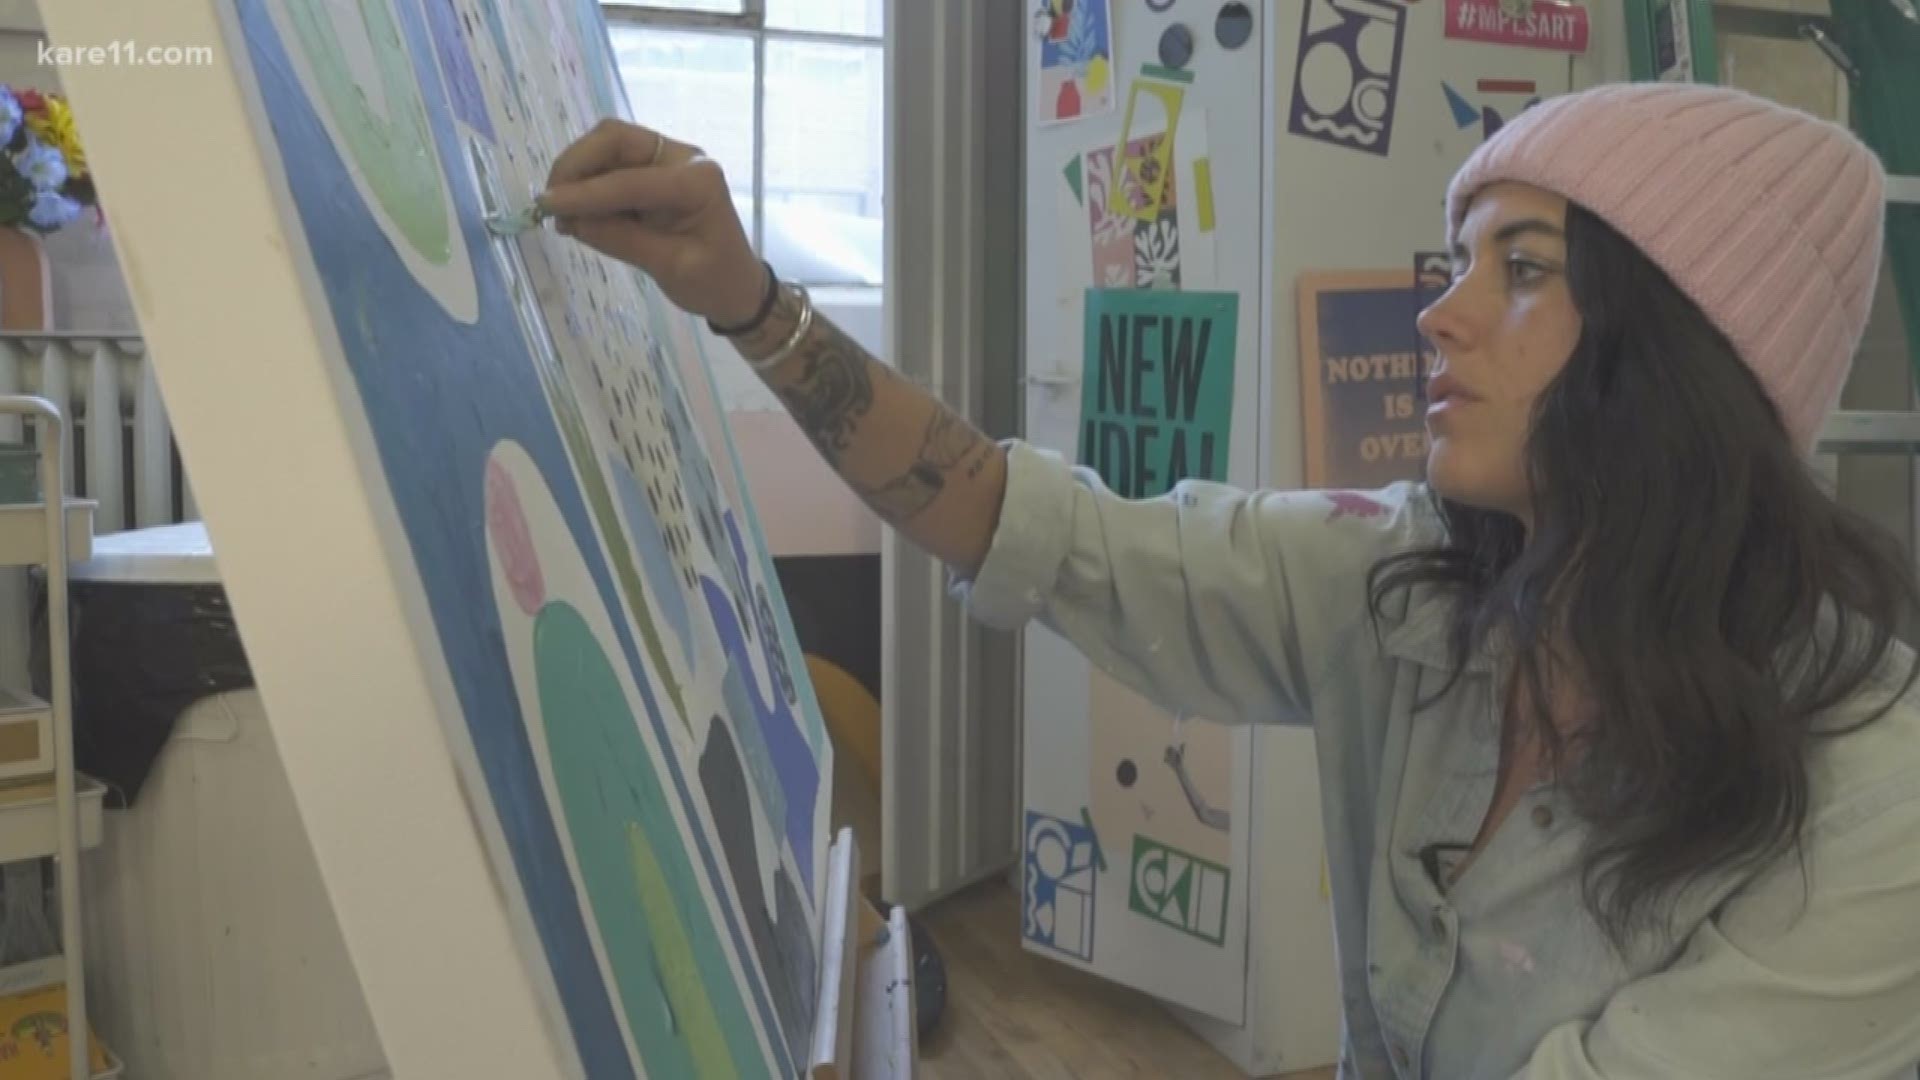 Hubbed out of an artist space in northeast Minneapolis, Mary's work takes many different forms, including paintings, murals and even stationery. https://kare11.tv/2EPtqwj